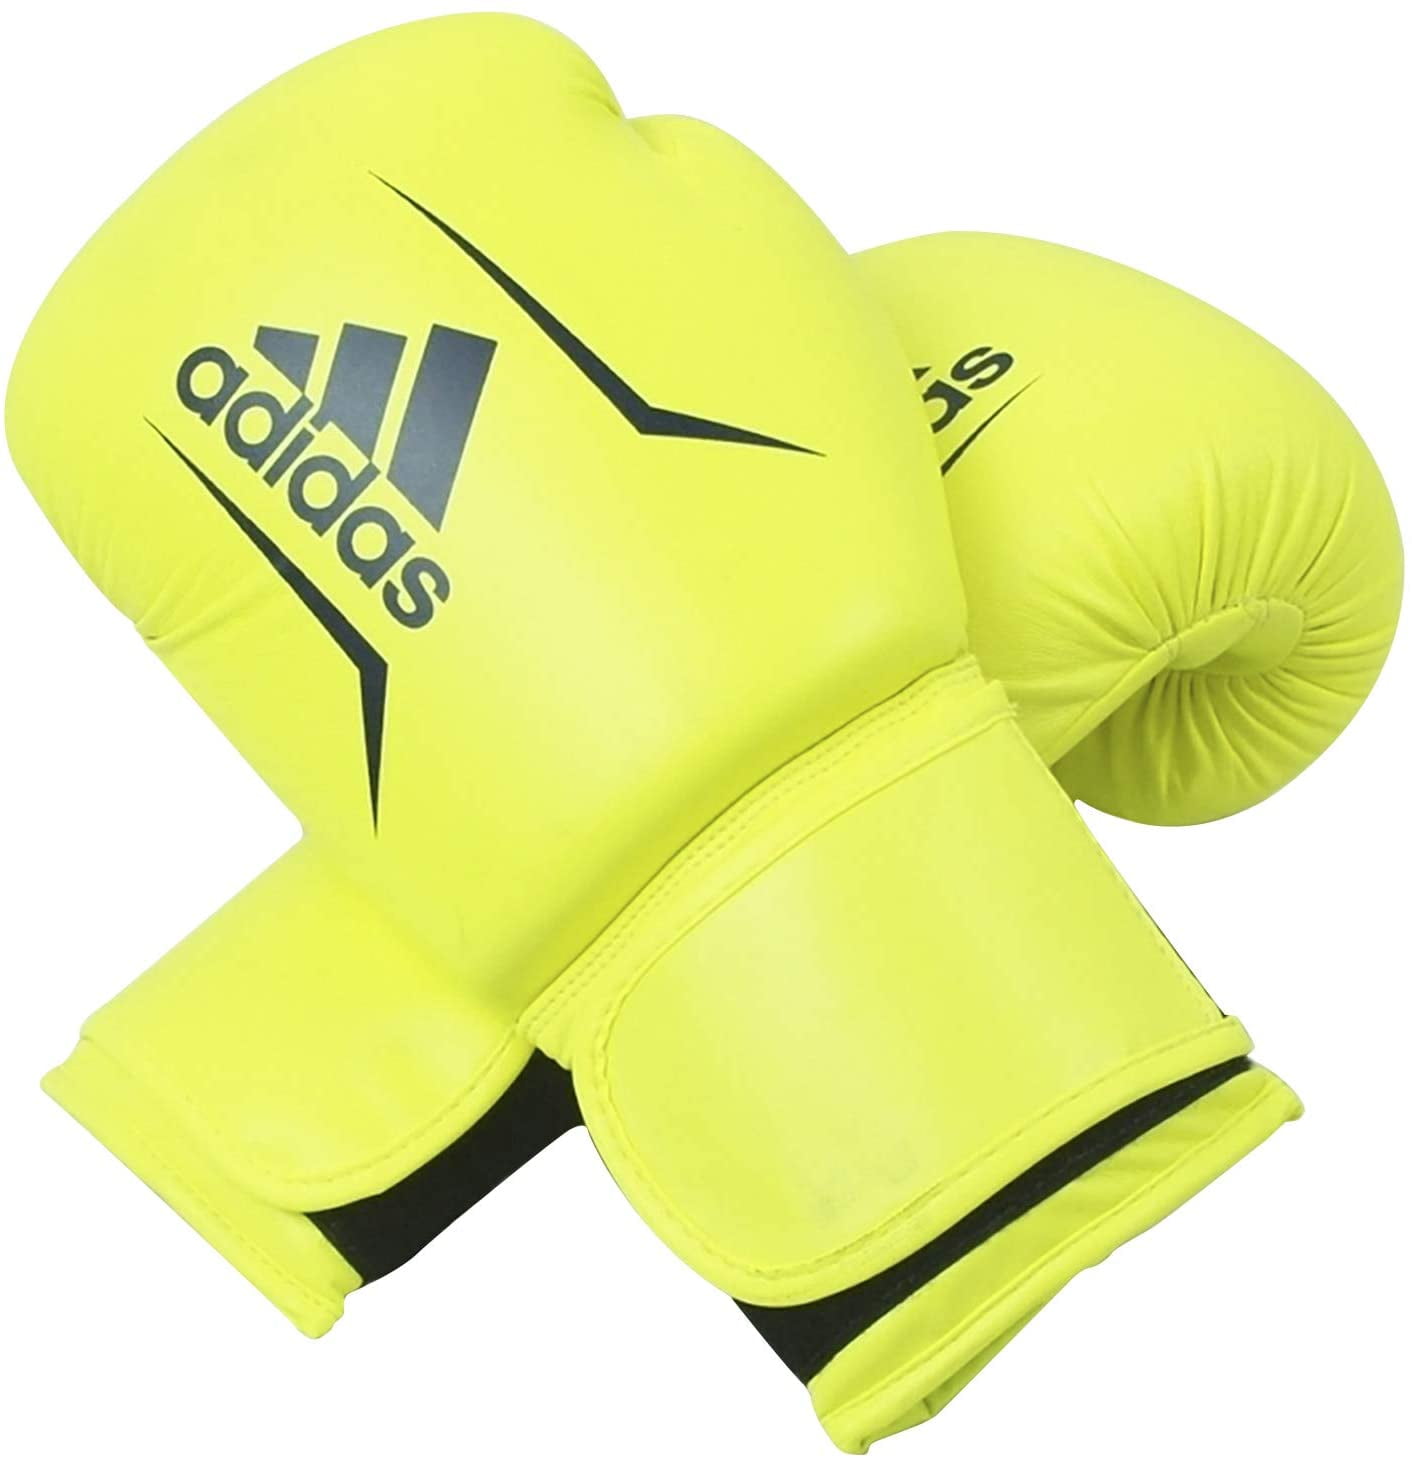 geweer Kilometers Verslaafd adidas FLX 3.0 Speed 50 Boxing & Kickboxing Gloves for Women and Men for  Light Sparring, Training, Gym, Punching, Fitness and Heavy Bags. 10oz  ,Solar Yellow, Dark Blue - Walmart.com